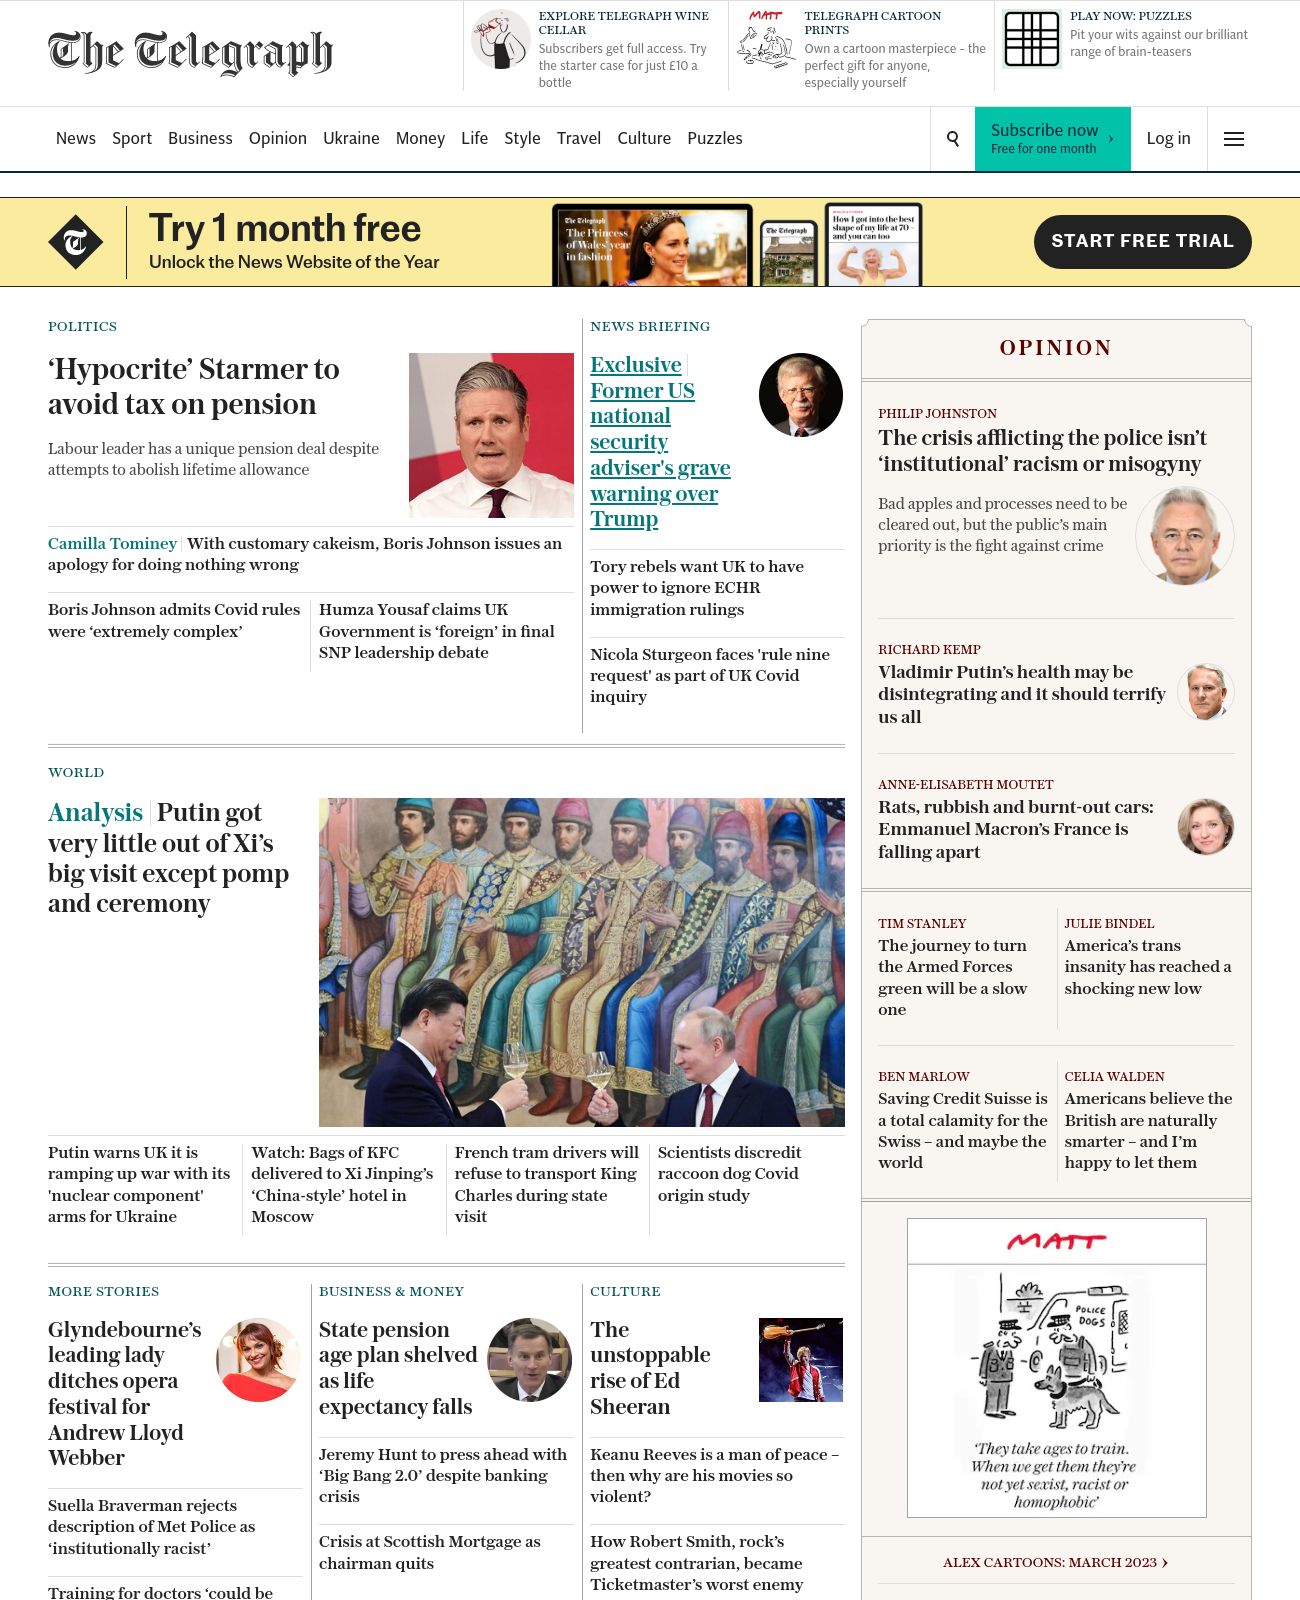 The Telegraph at 2023-03-22 01:36:01+00:00 local time